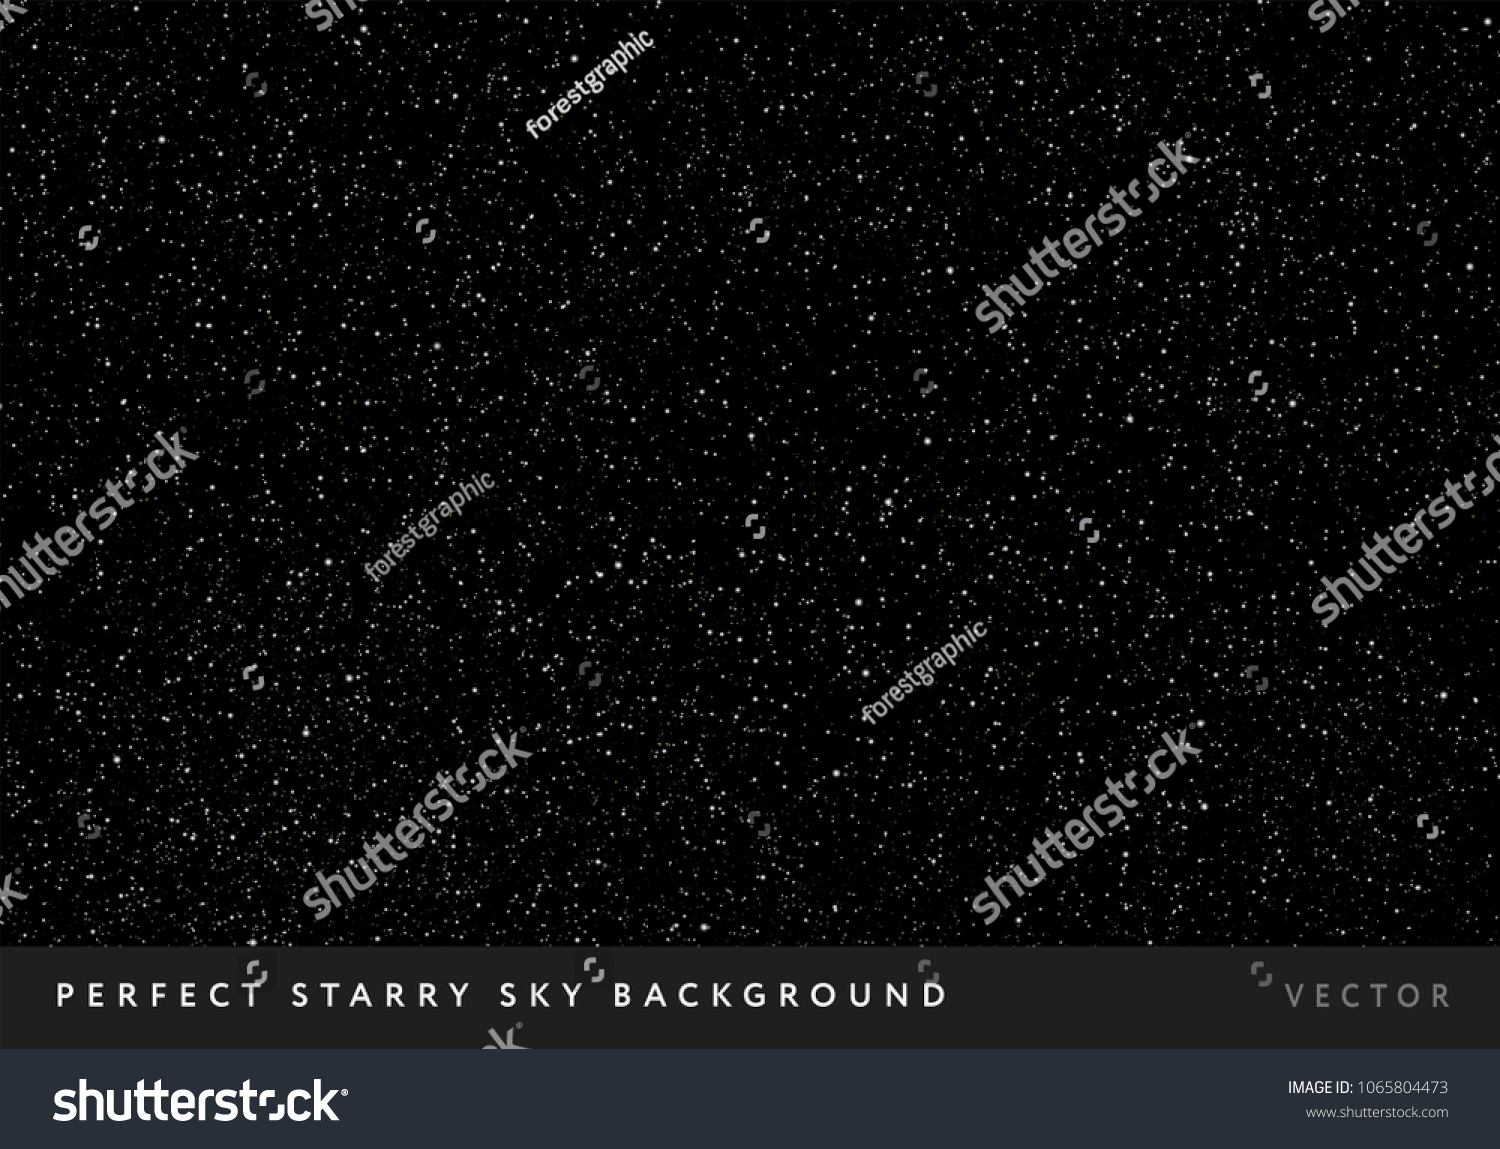 Perfect starry night sky background - vector stars space background #1065804473